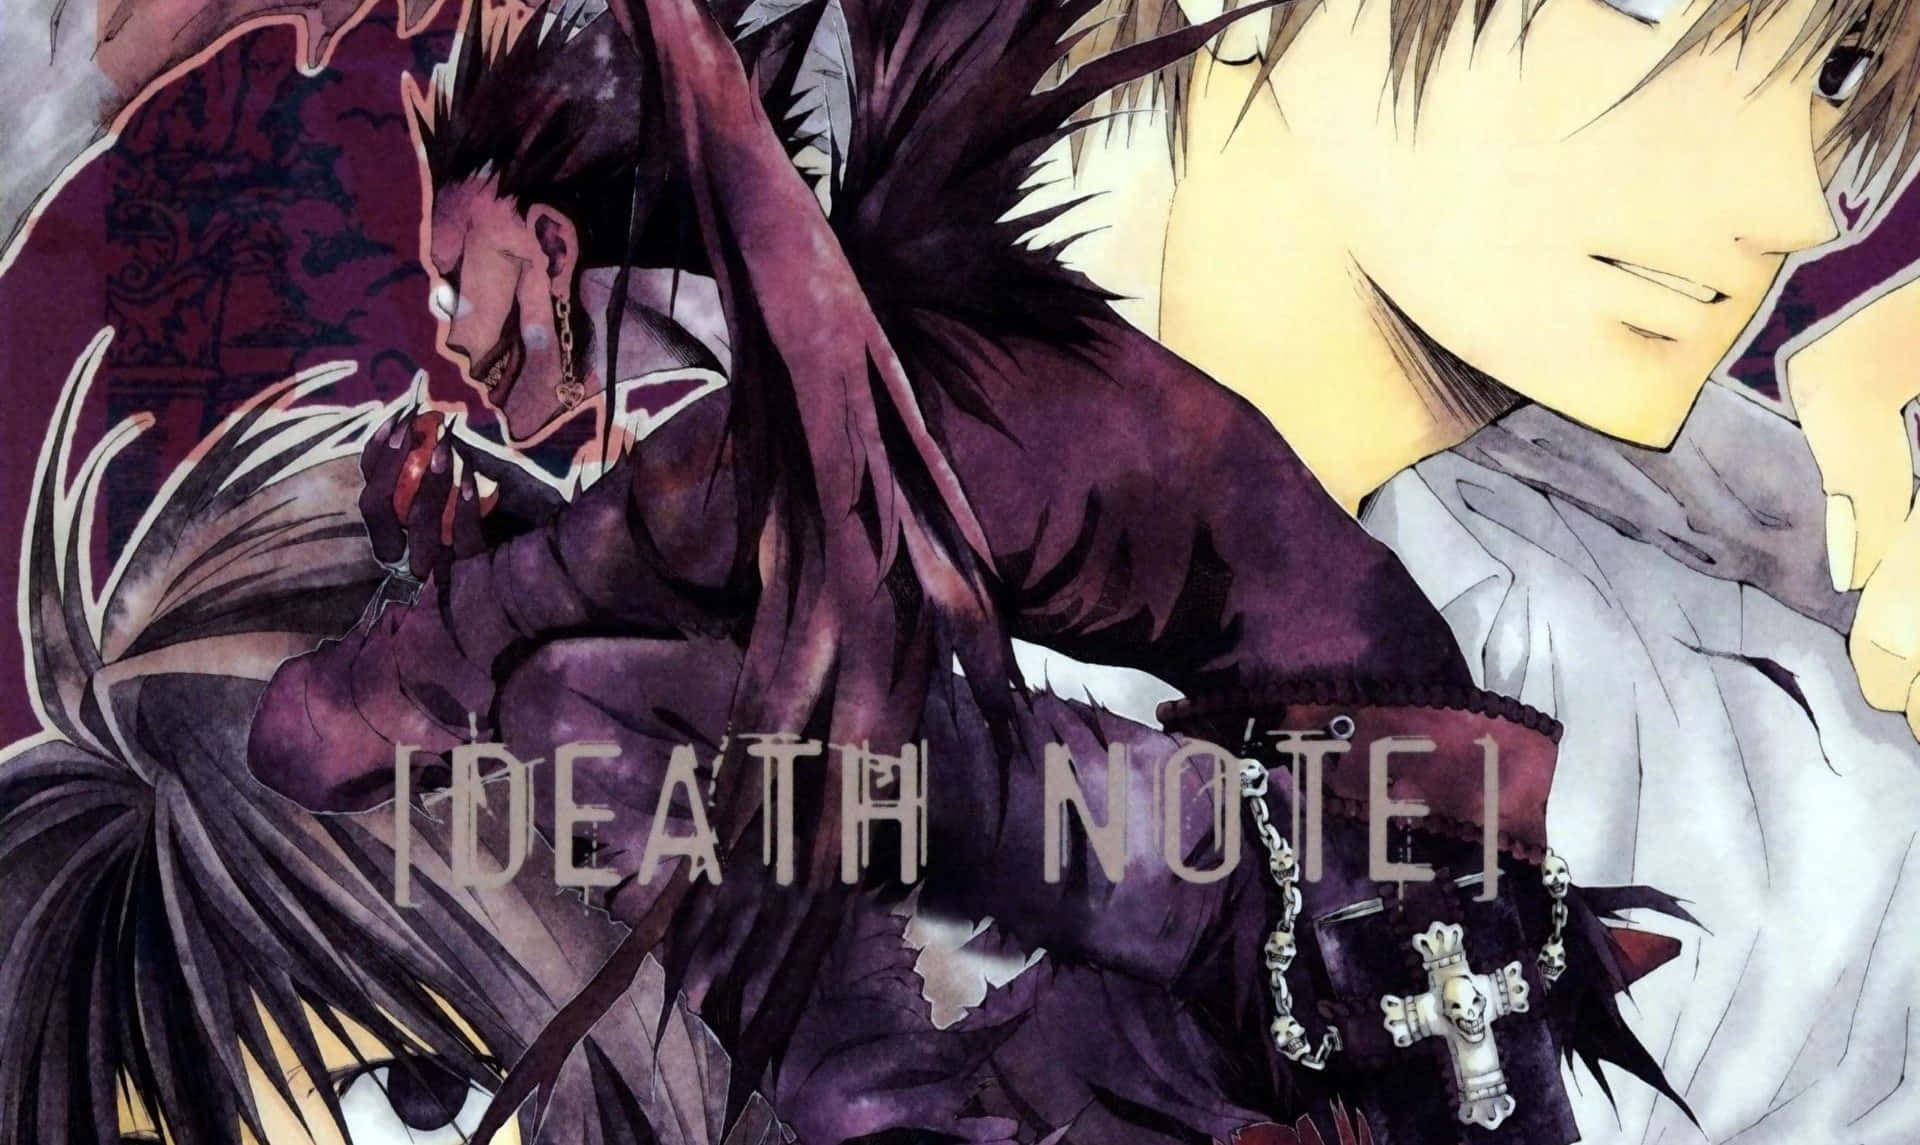 Light and L must team up in order to take down the latest sinister plot in DEATH NOTE. Wallpaper